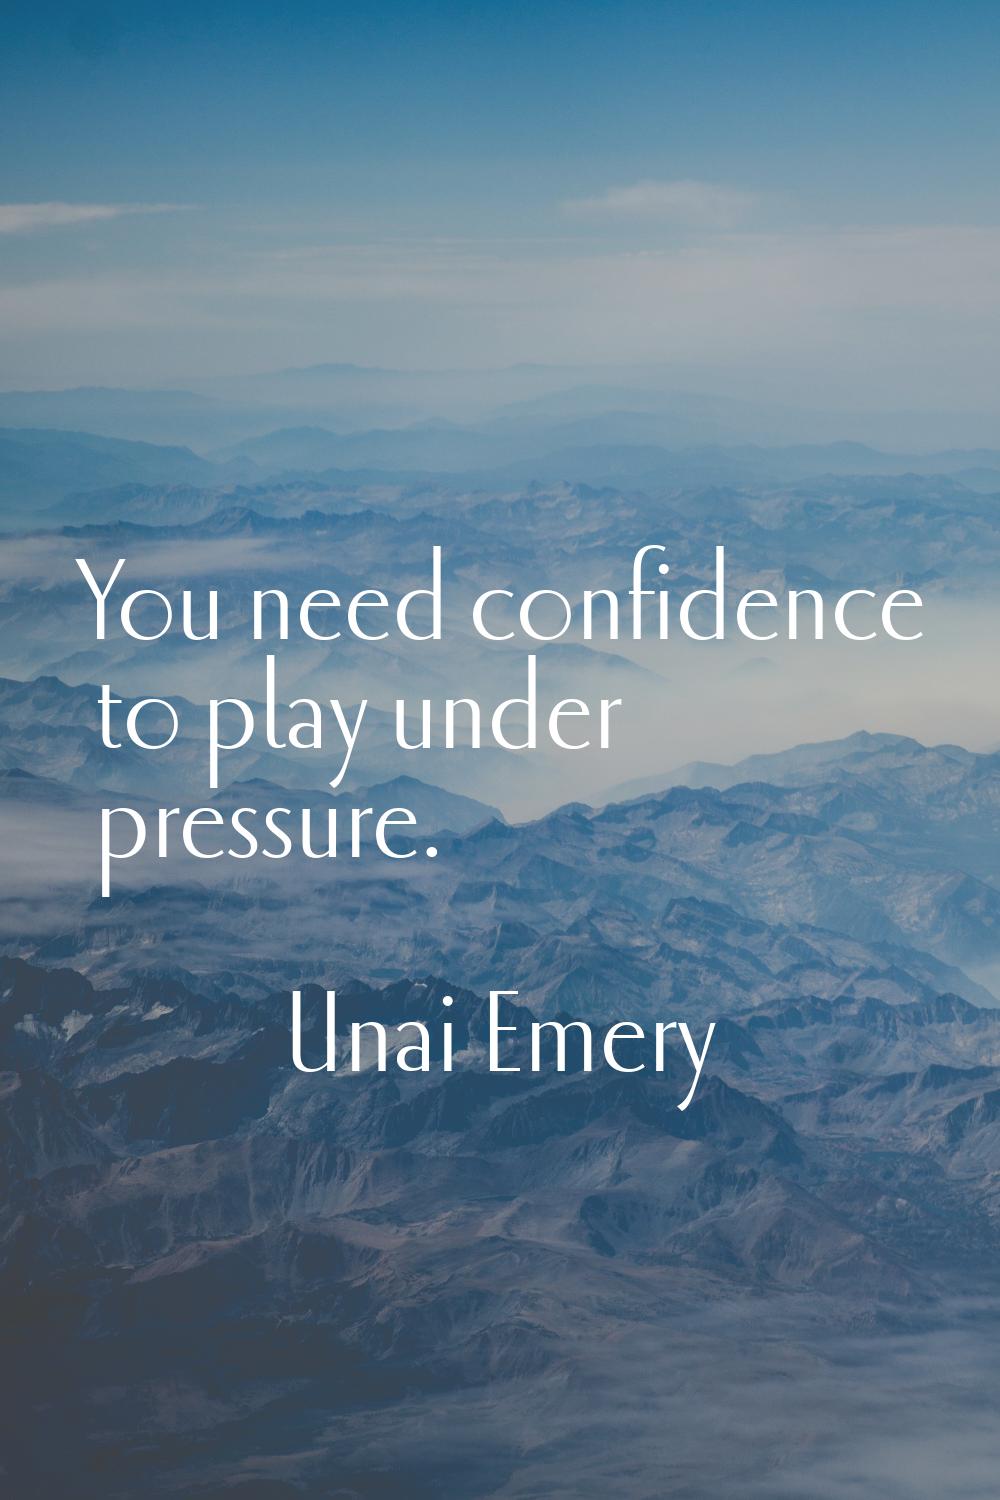 You need confidence to play under pressure.